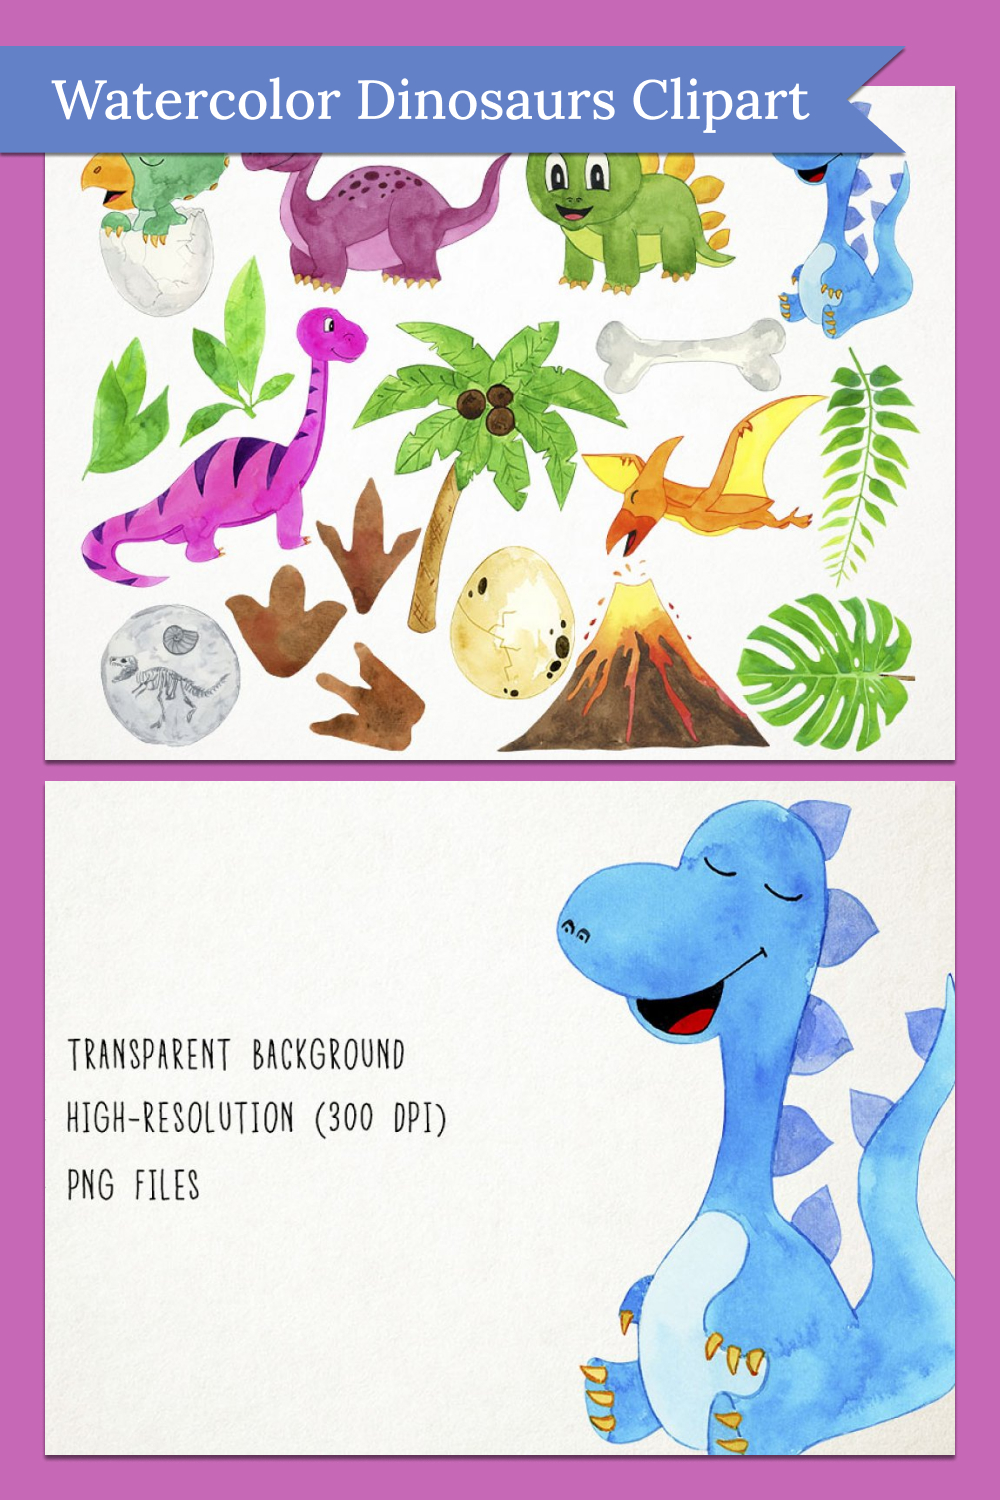 Watercolor dinosaurs clipart of pinterest.